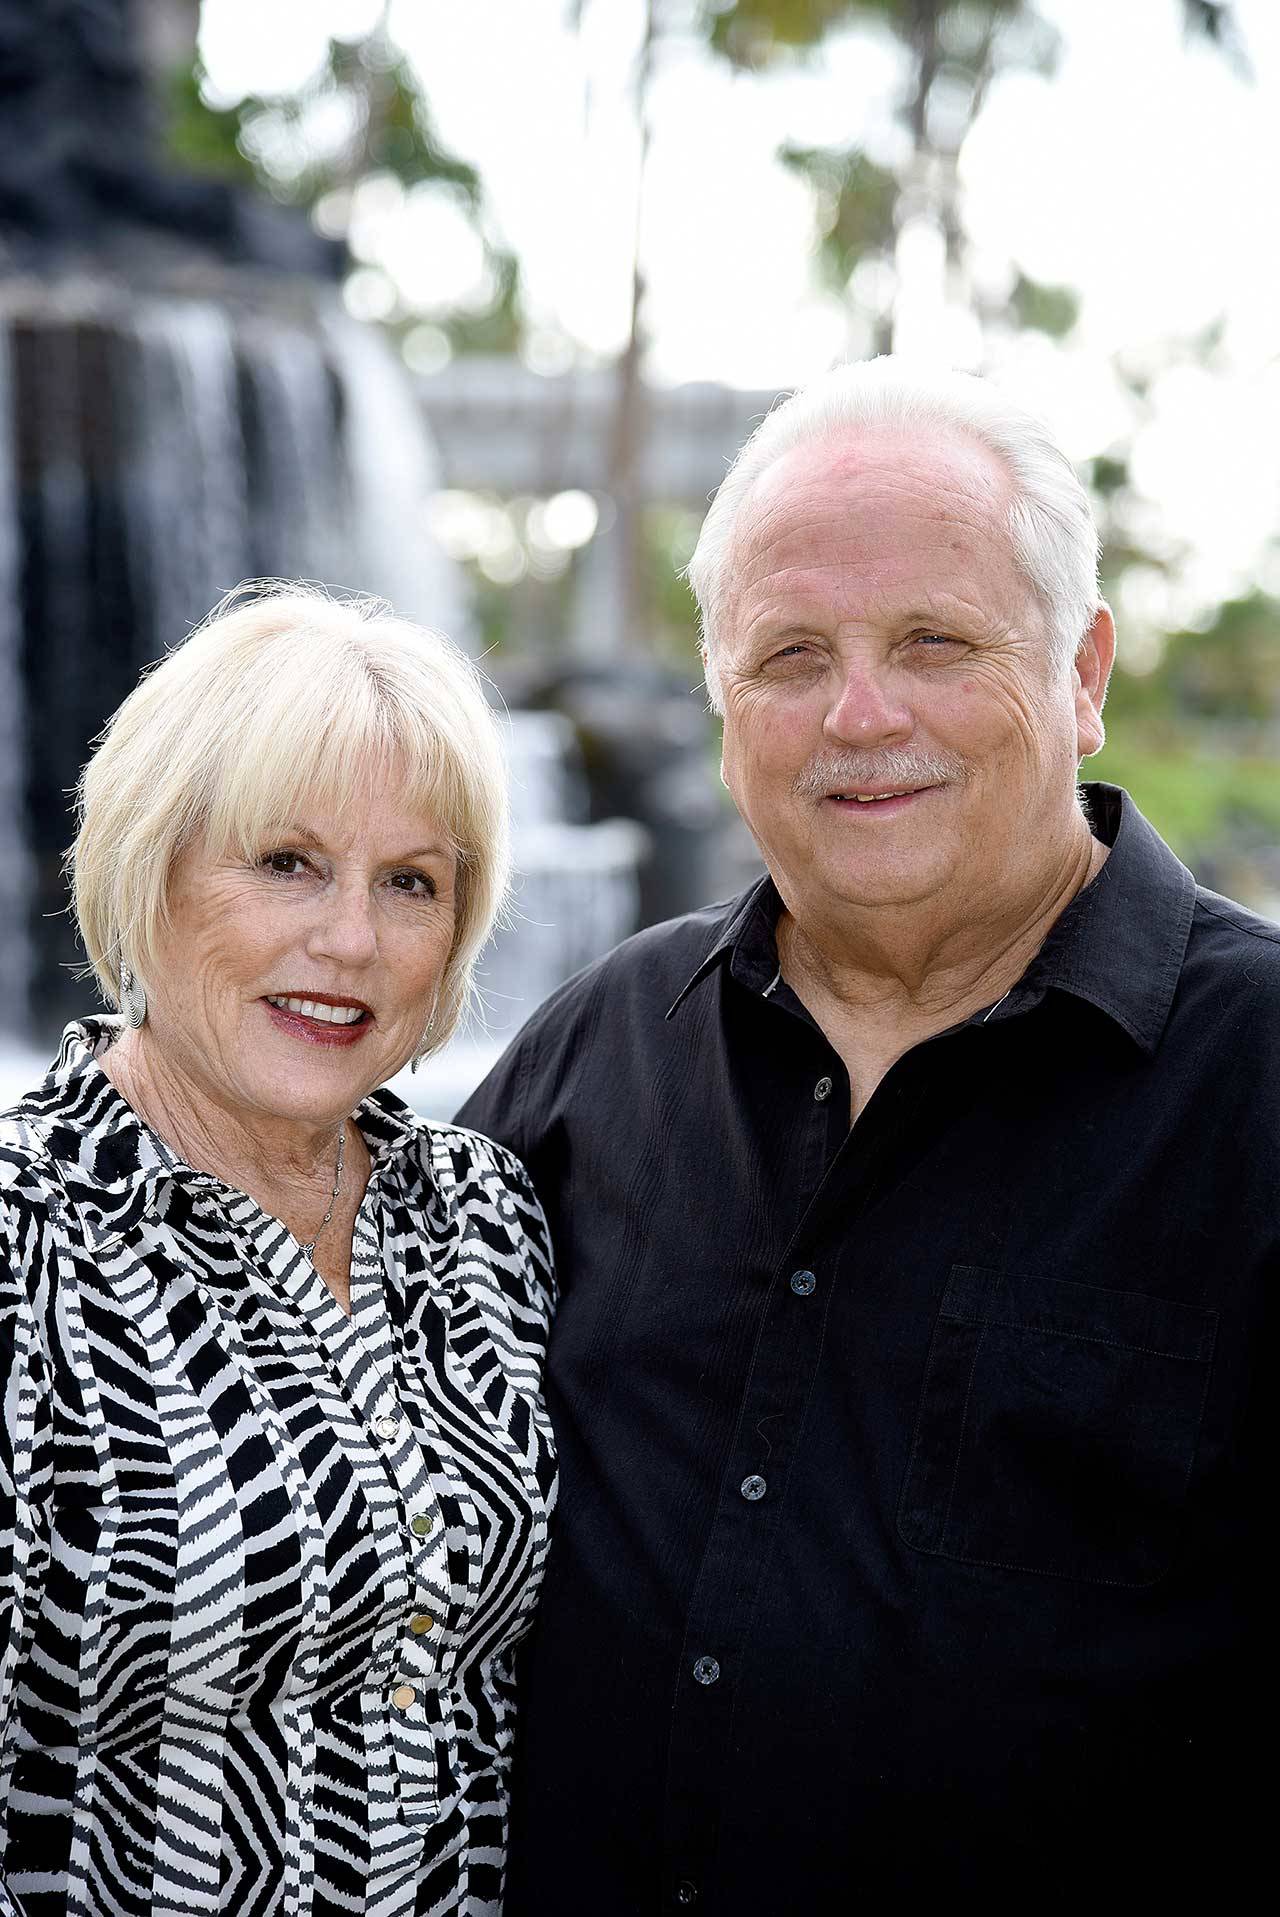 Dan Wilder Sr. and his wife, Sally. (Photo courtesy of the Wilders)